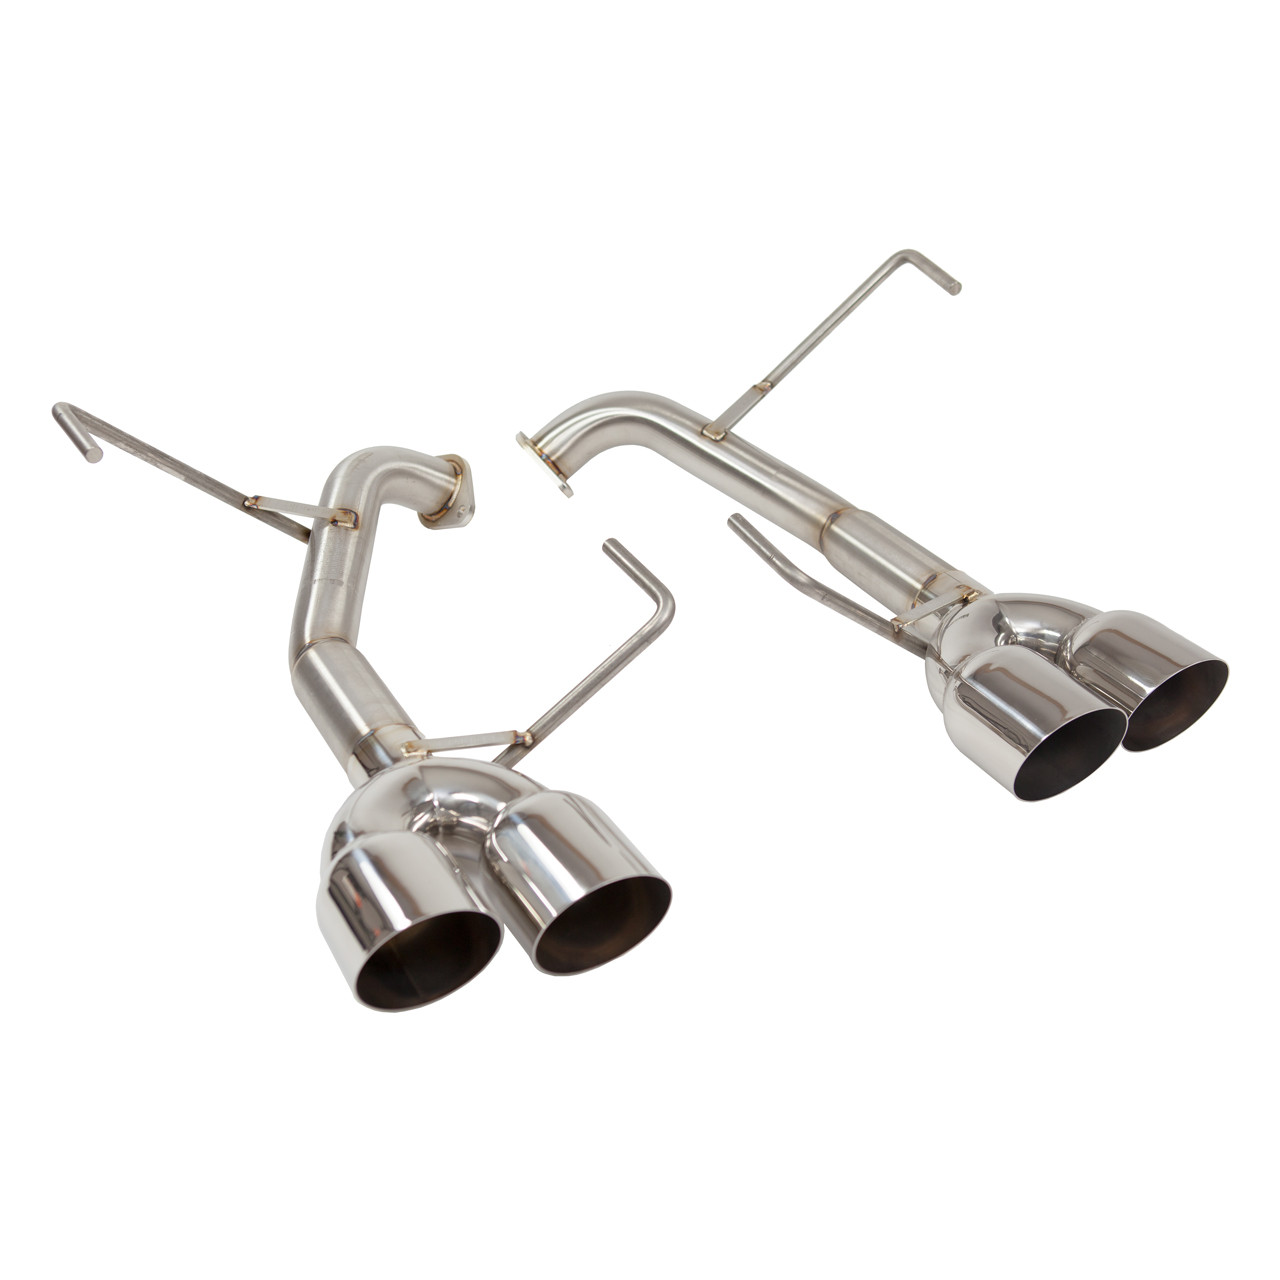 Nameless Performance Catback Exhaust with muffler delete and 3.5 inch single wall exhaust tips